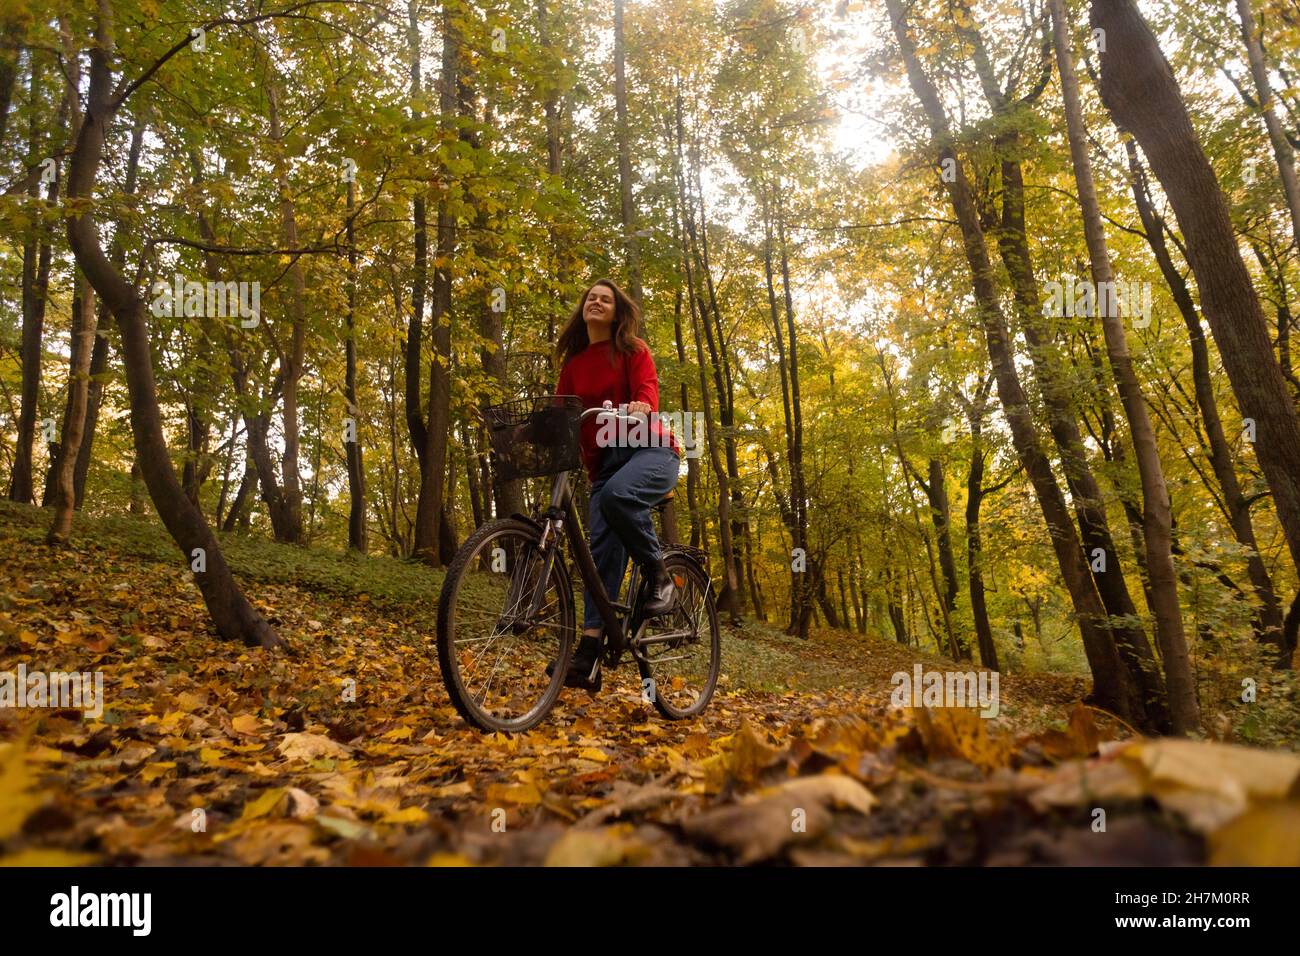 Woman cycling in front of trees at autumn park Stock Photo